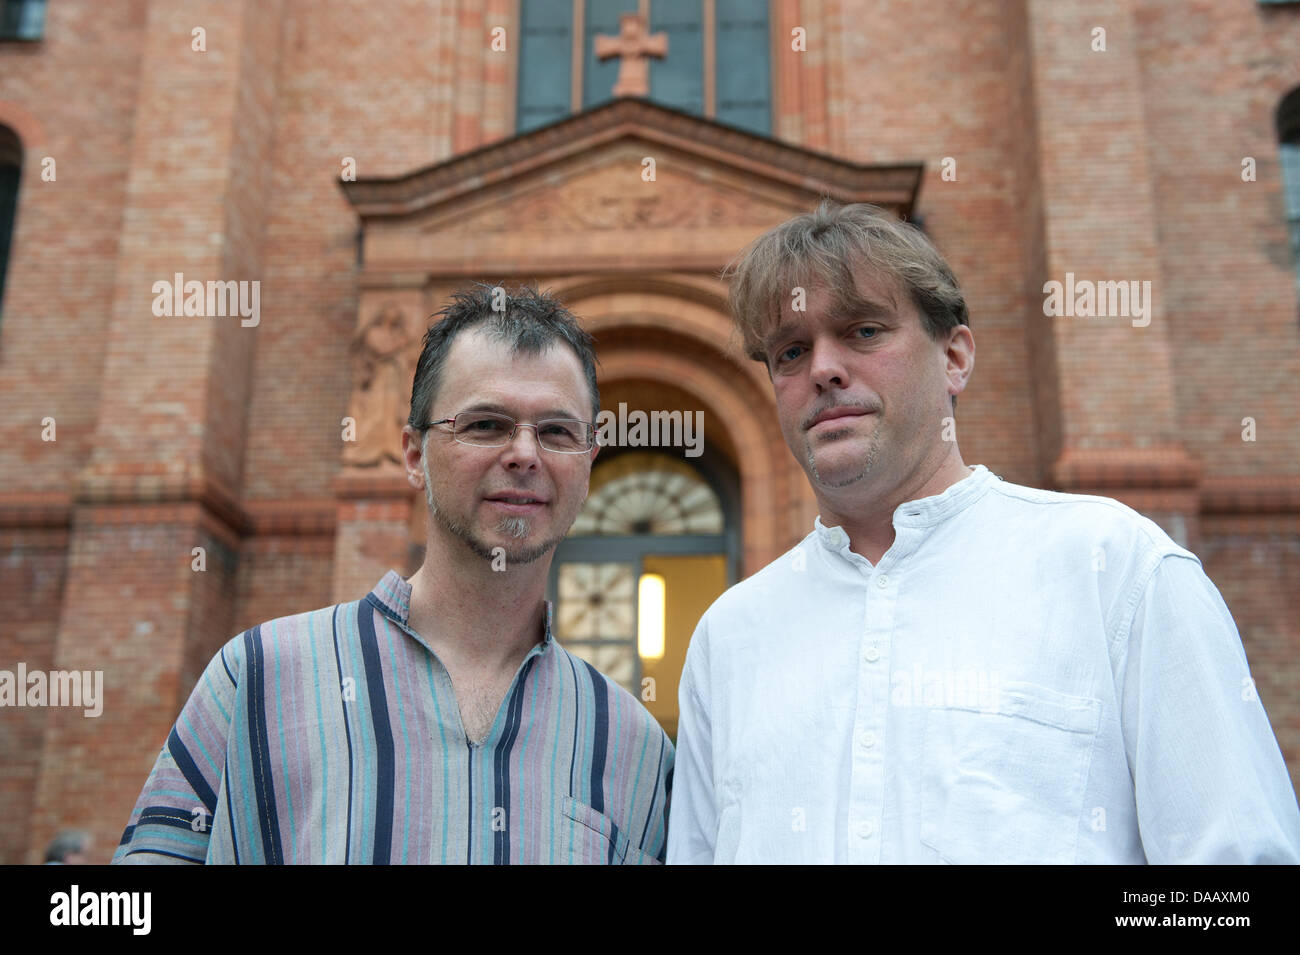 Priest Christoph Schmidt (L) and Norbert Reichers pose before the beginning of a religious service in front of the Evangelical St. Thomas Church in Berlin, Germany, 21 September 2011. The archbichopric criticized that St. Thomas parish is letting both homosexual priests, who have been suspended, give e relgious service in their rooms. Photo: JOERG CARSTENSEN Stock Photo